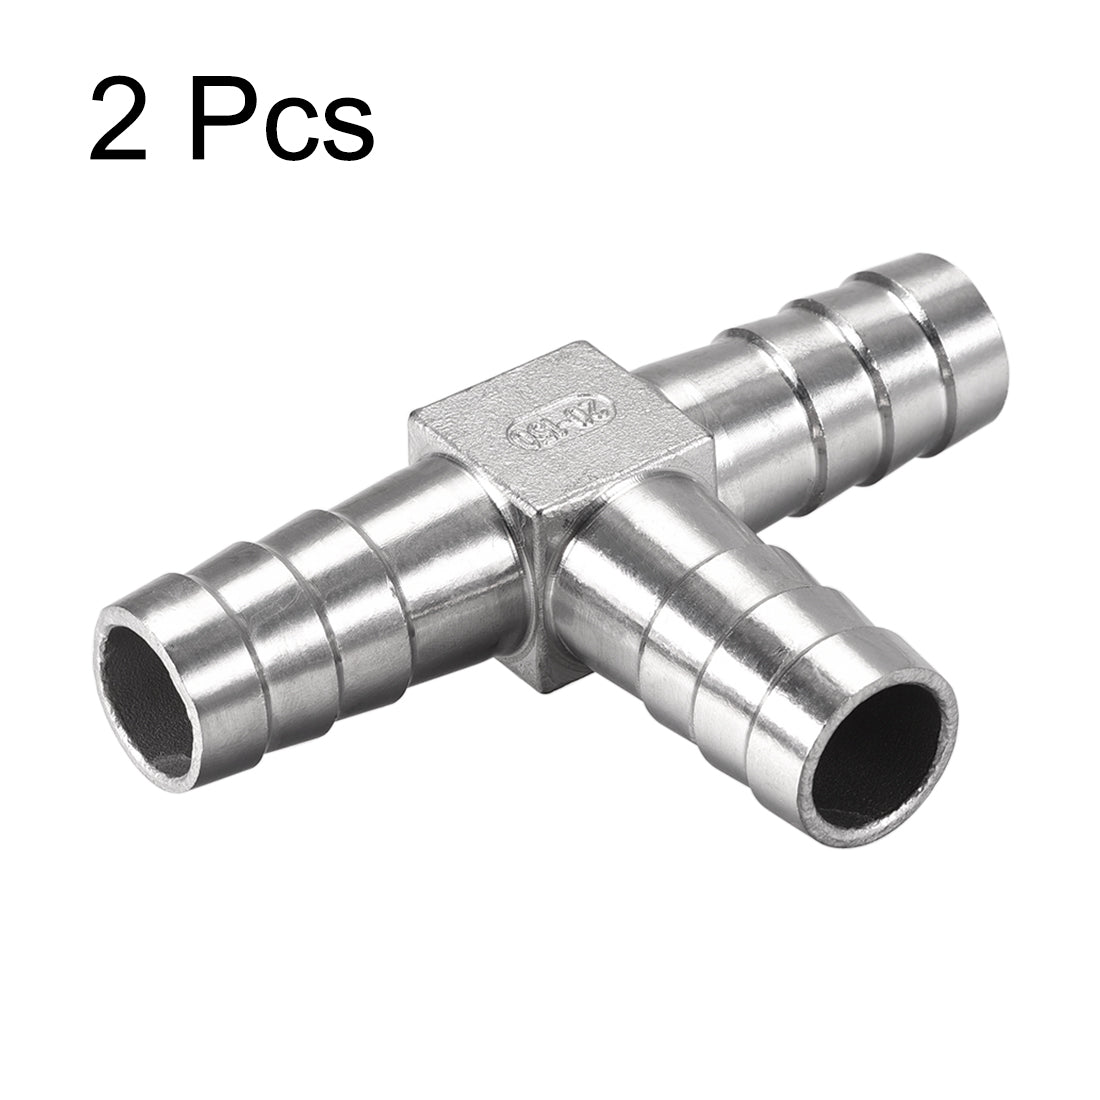 uxcell Uxcell 25/32-Inch (20mm) Hose ID Barb Fitting Stainless Steel 3-Way T Shaped Union Home Brew Fitting 2pcs